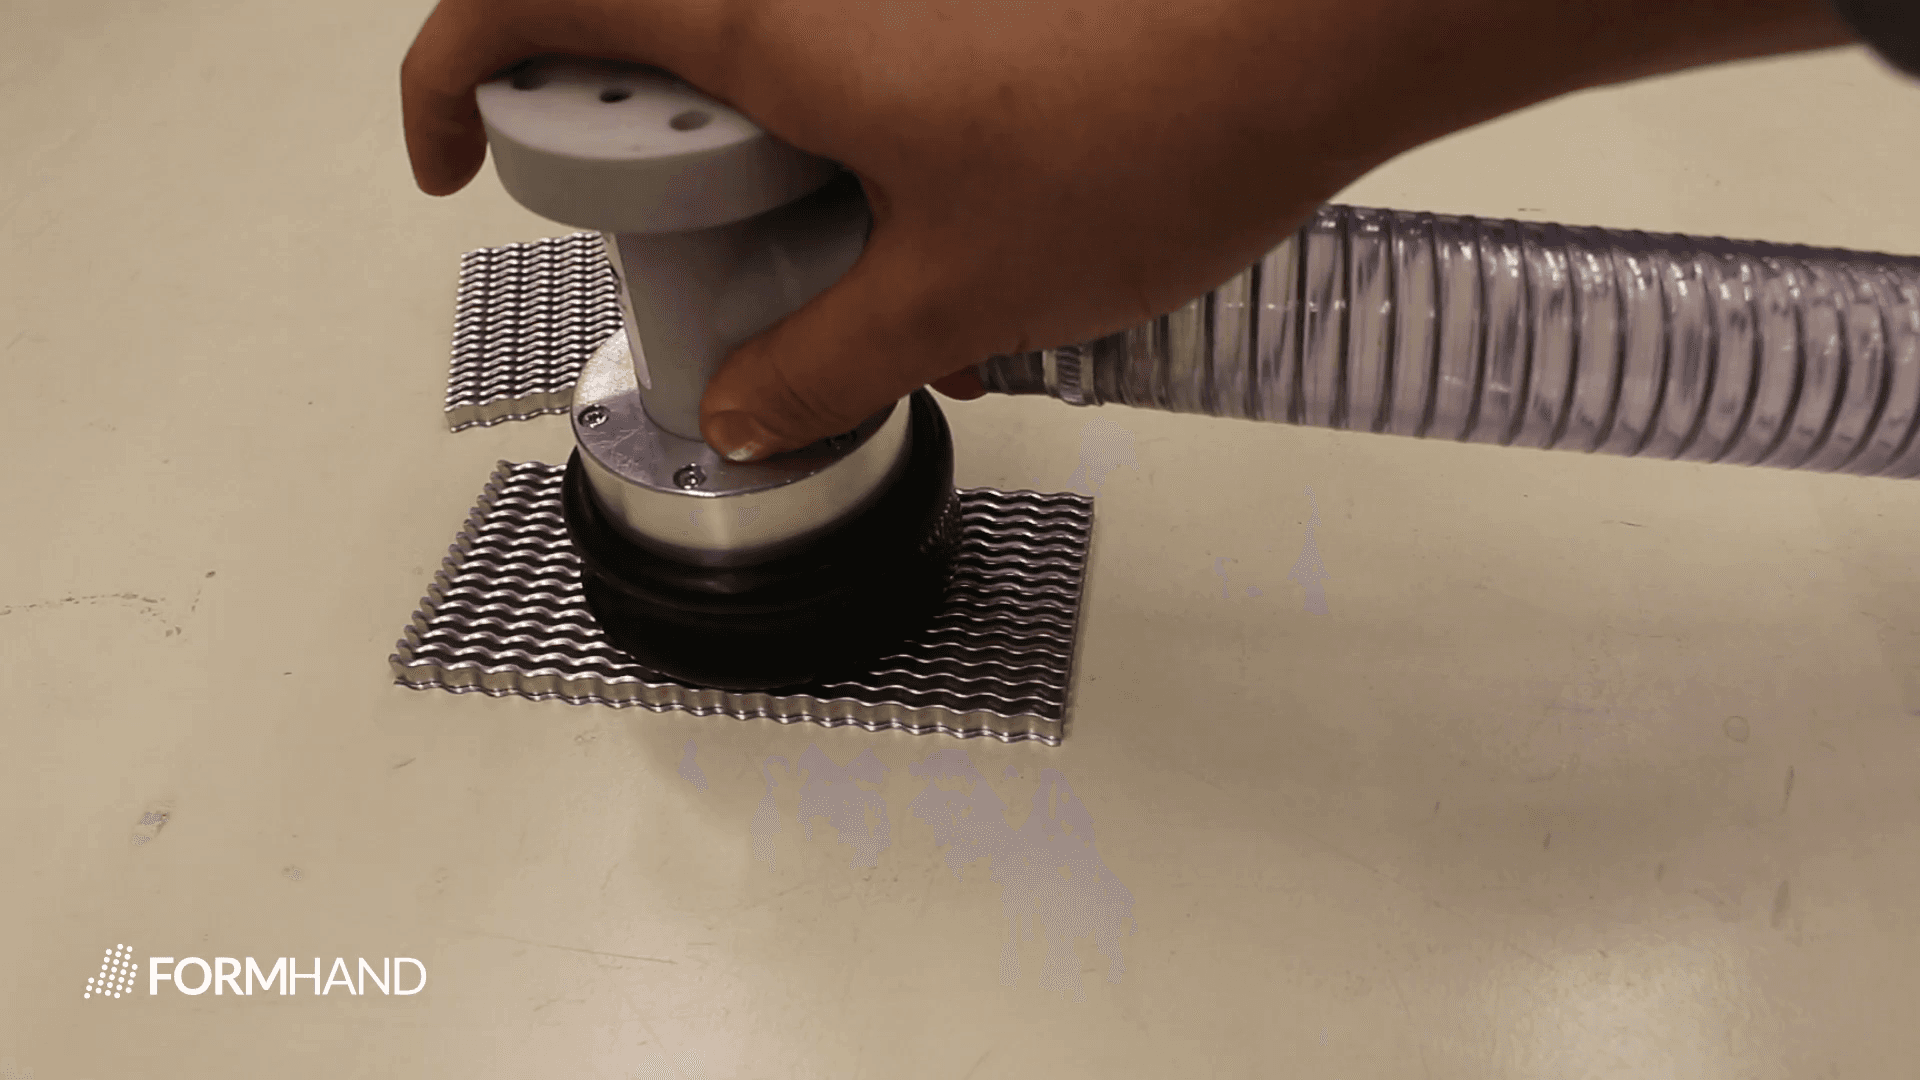 Formhand Gripper adapts to any surface